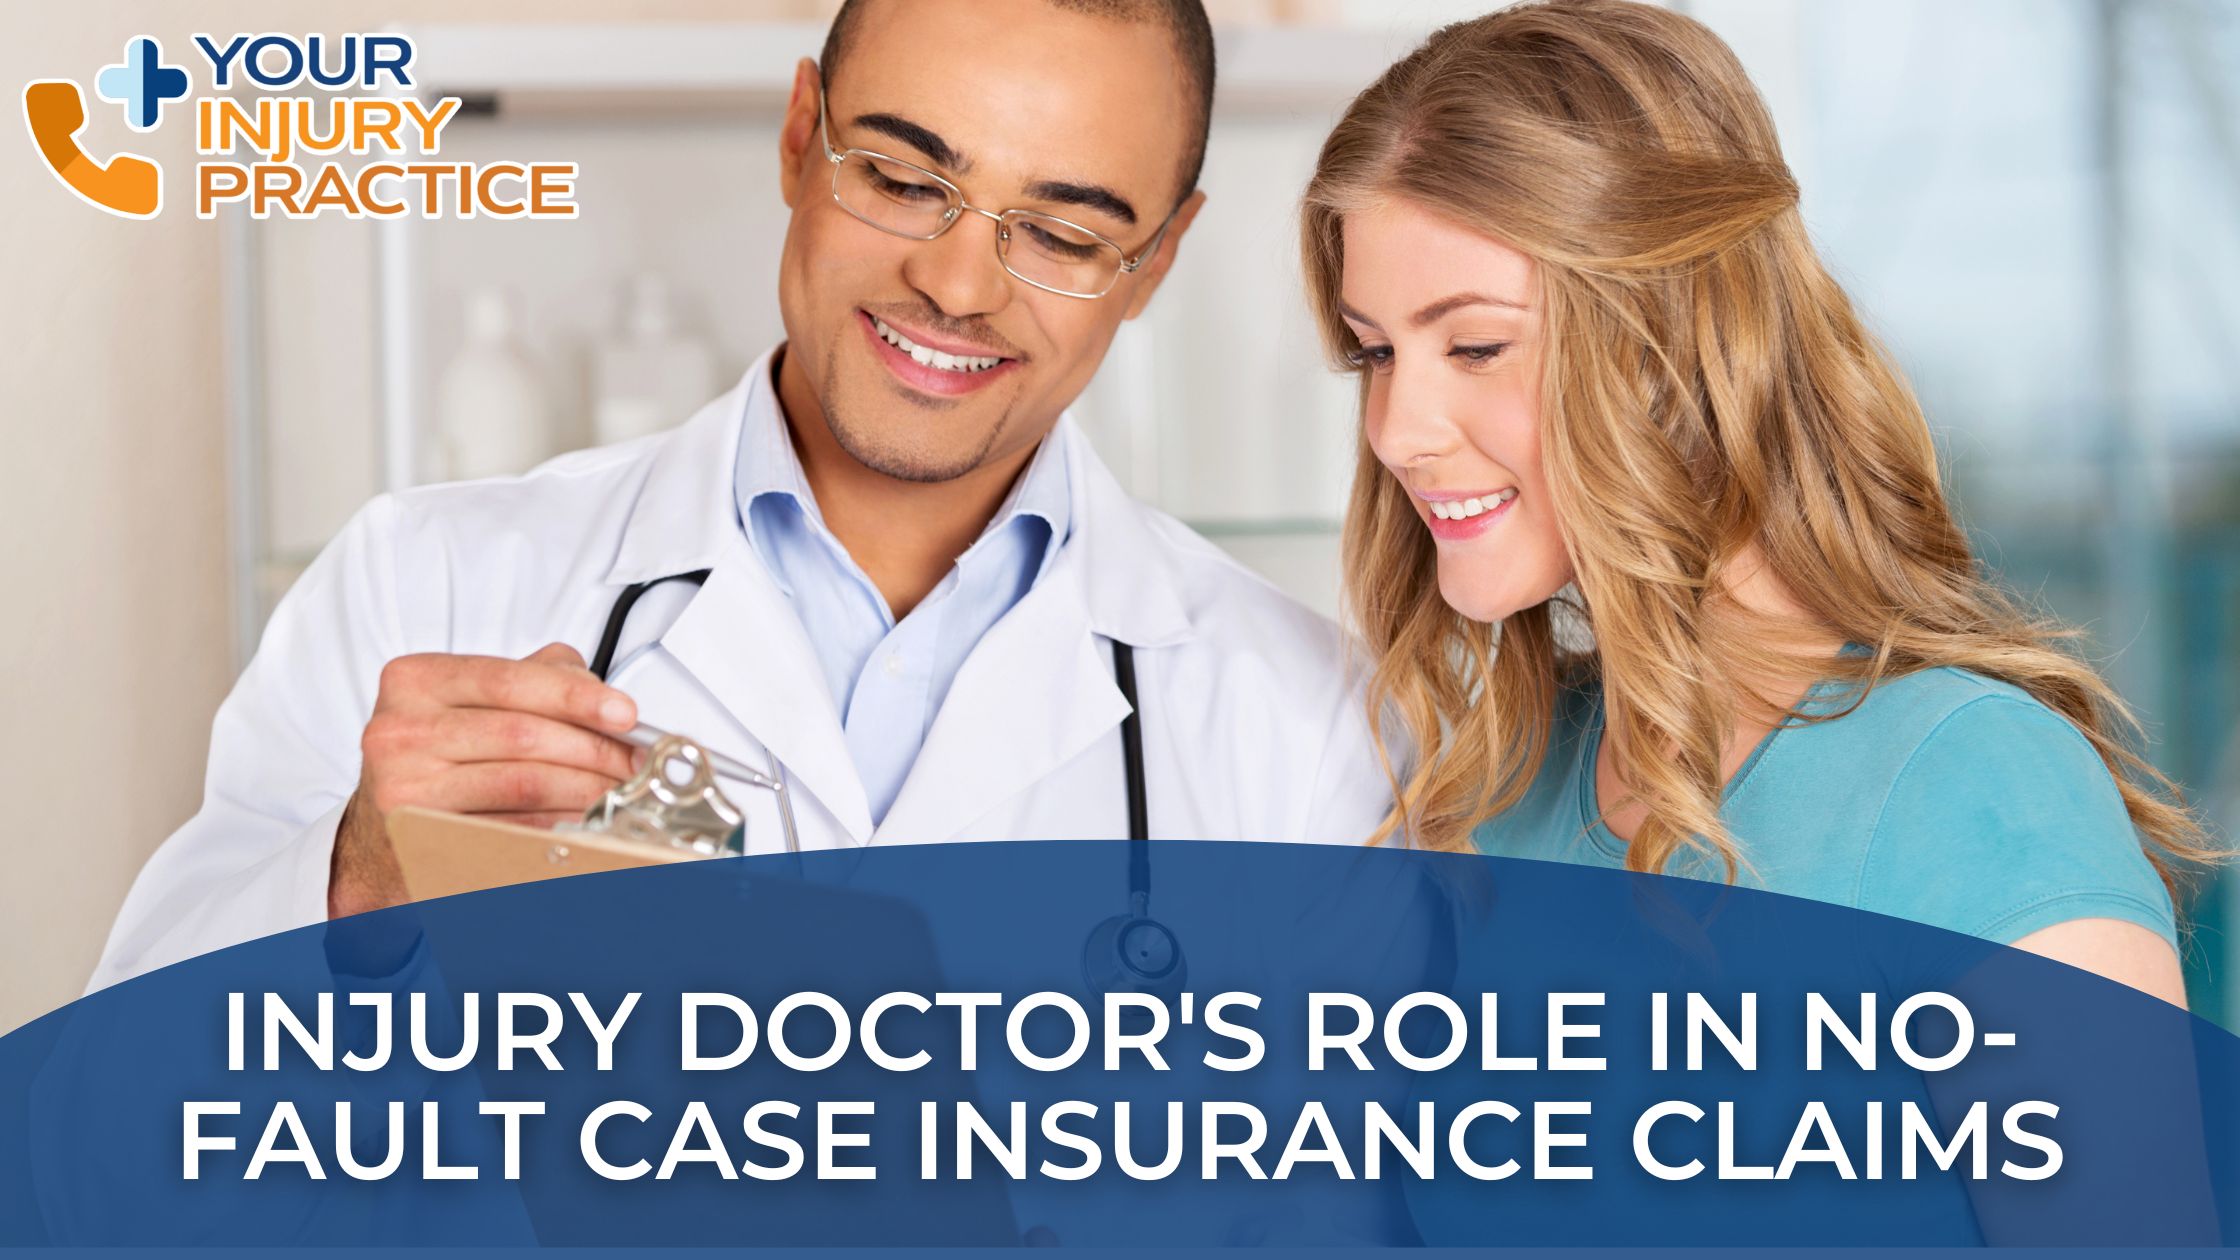 Injury doctors specializing in no fault cases play a crucial role in insurance claims.